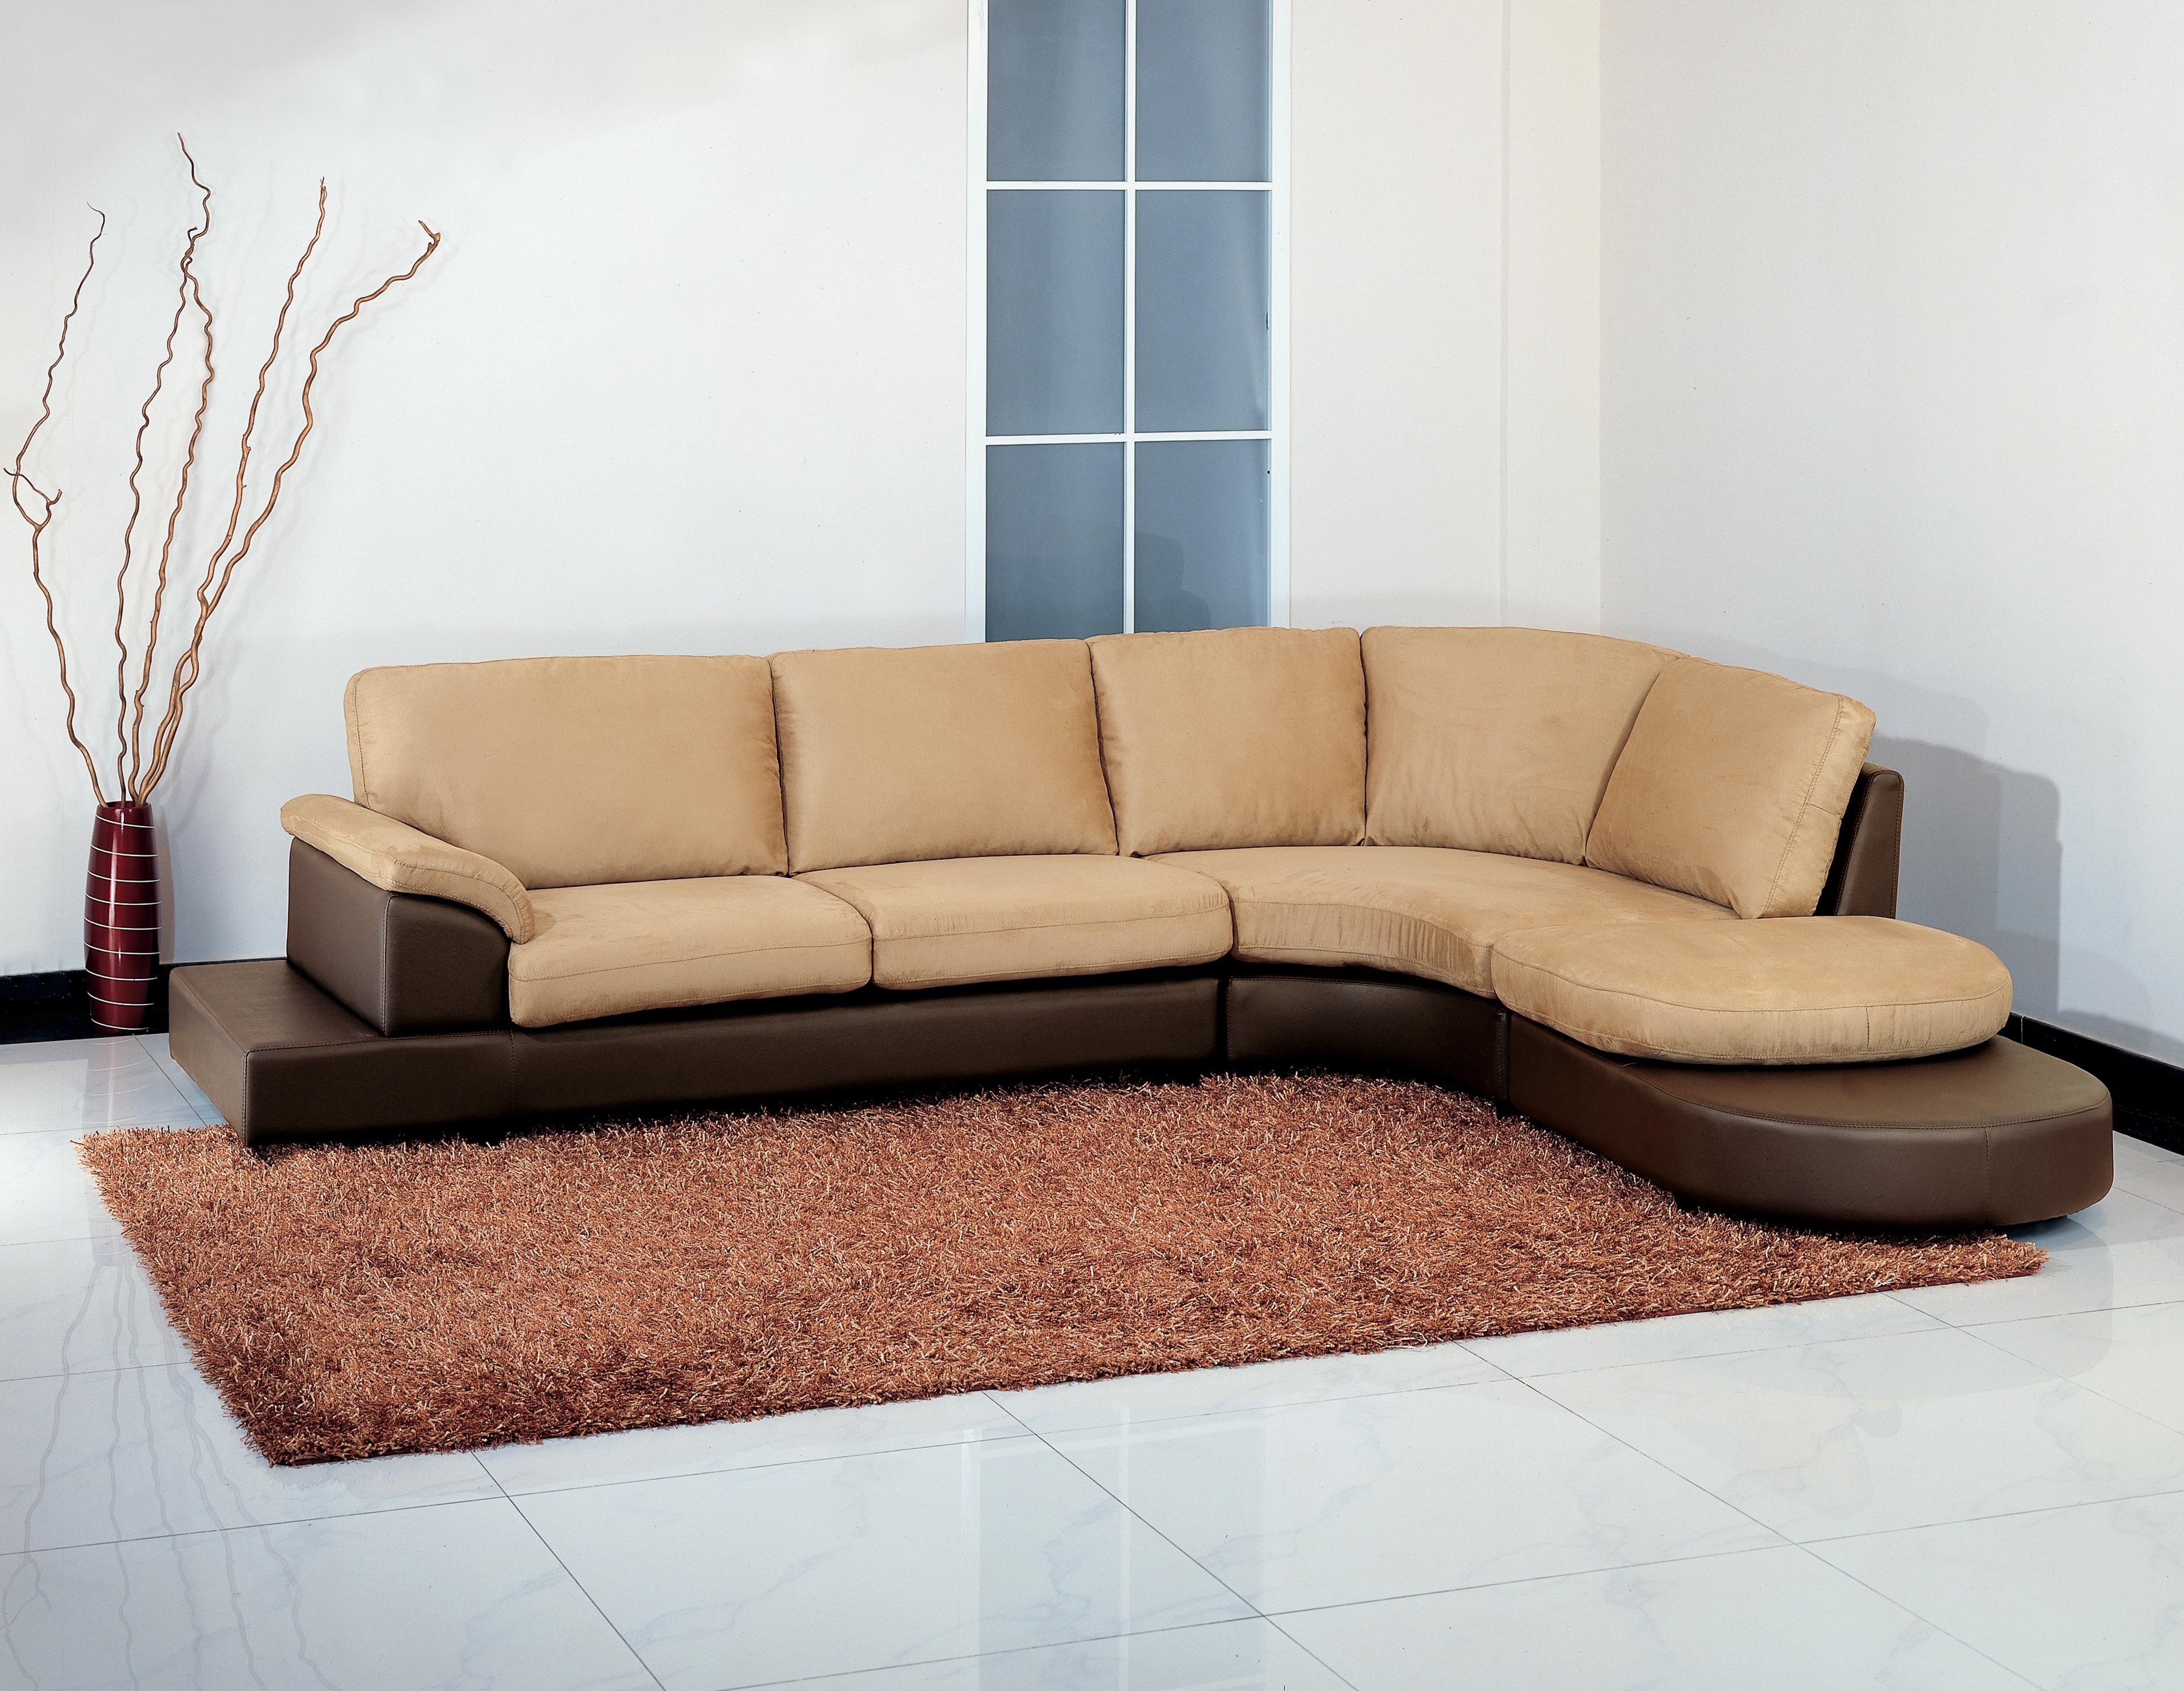 Abson Living Charlotte Beige Sectional Sofa And Ottoman Goodca Pertaining To Abbyson Living Charlotte Dark Brown Sectional Sofa And Ottoman (Photo 3 of 12)